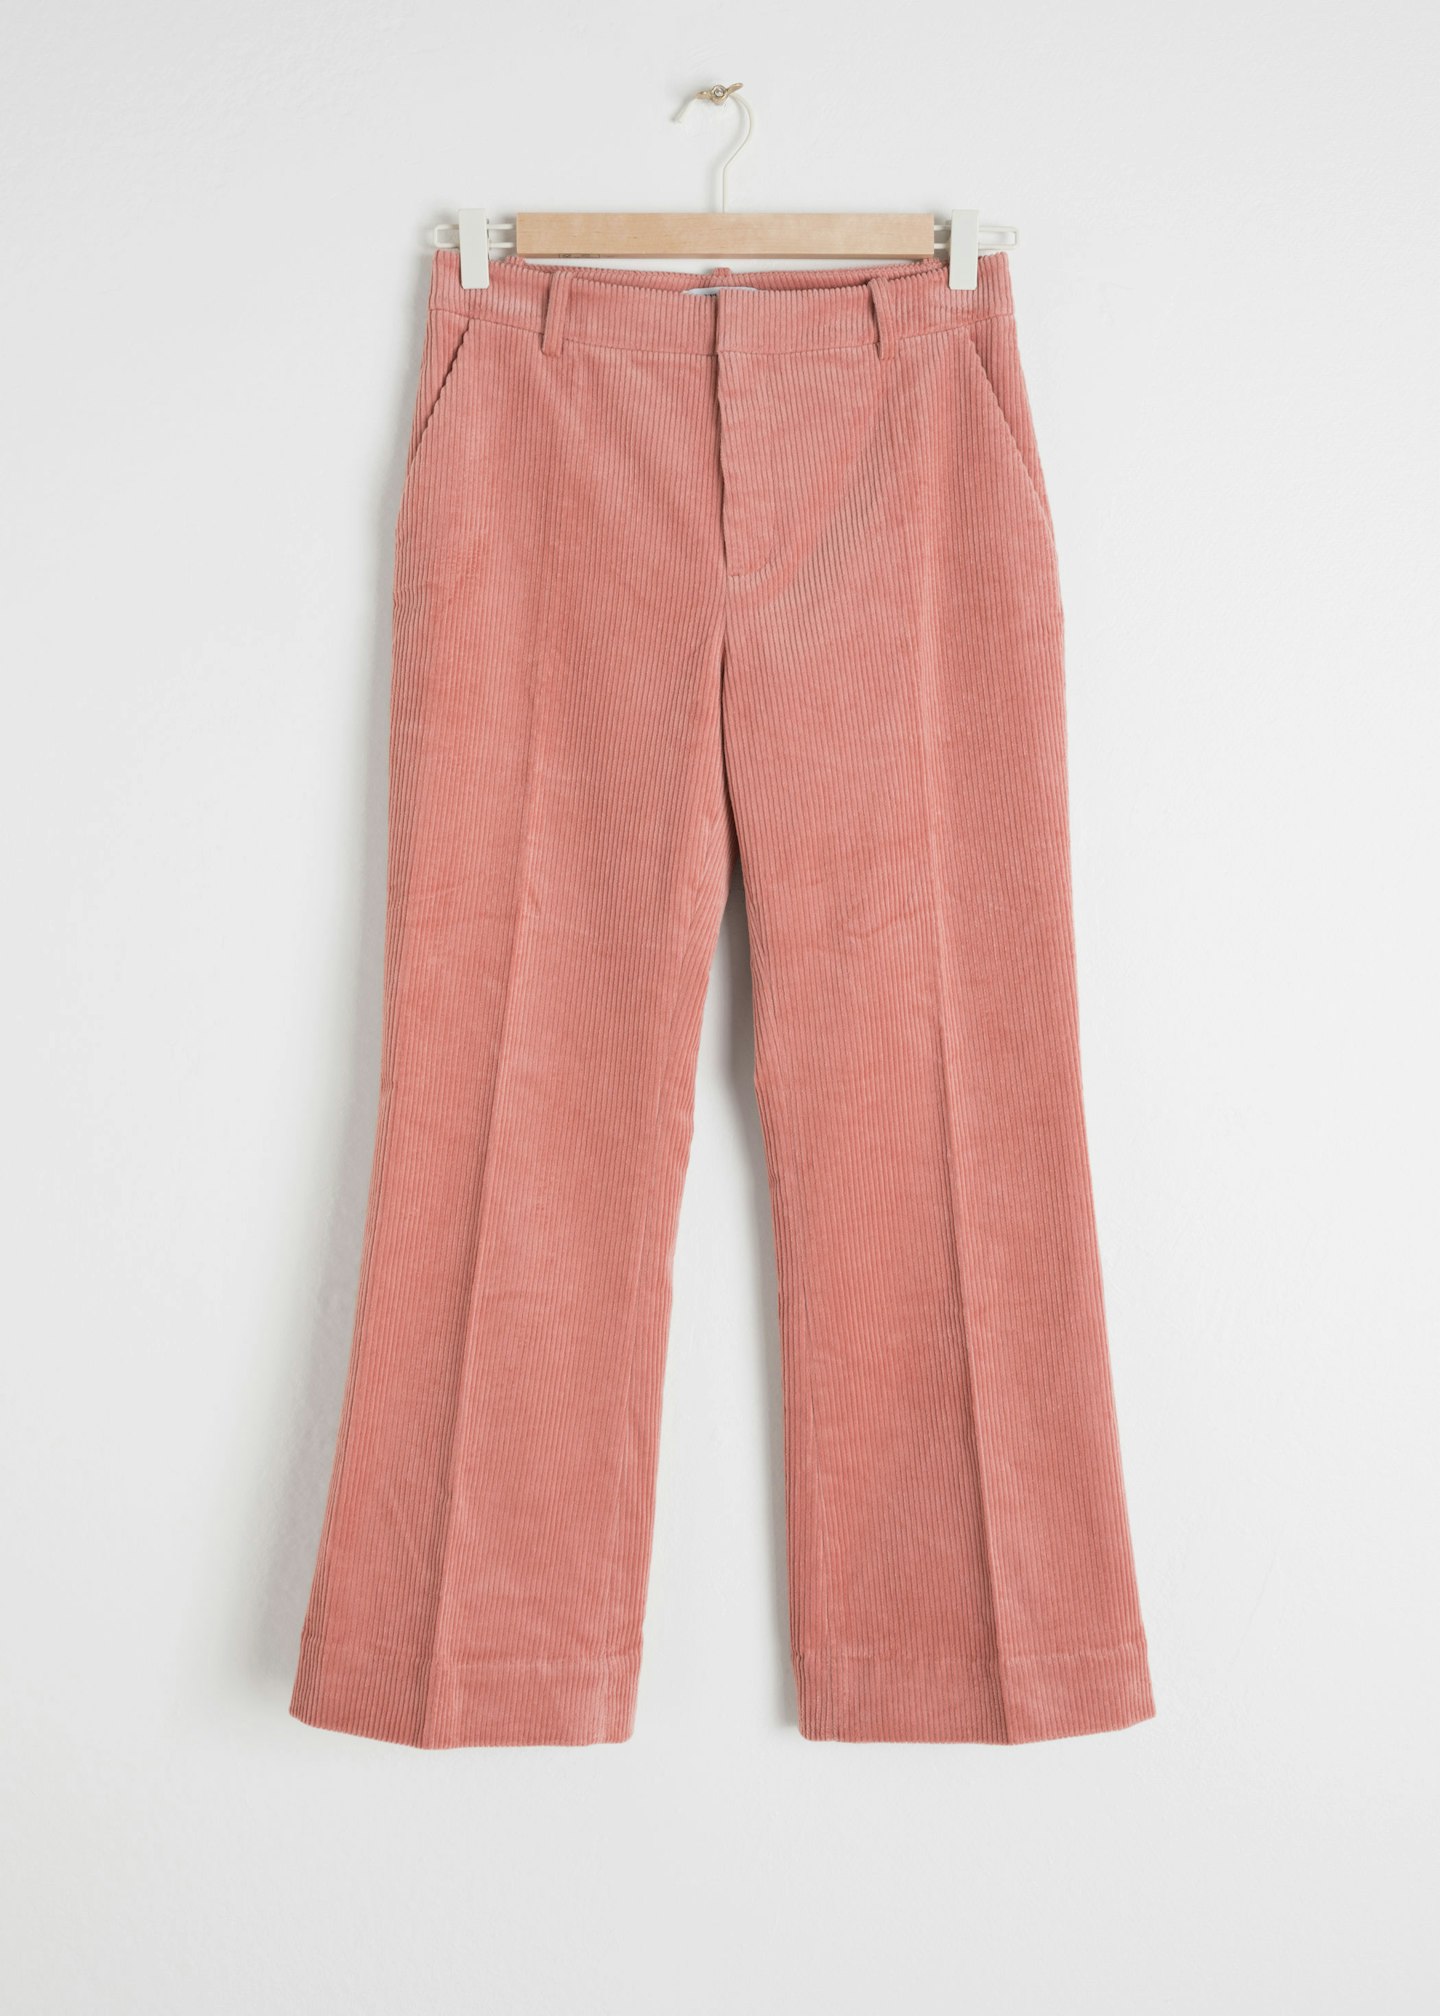 & Other Stories Cropped Wide Corduroy Trousers, £59